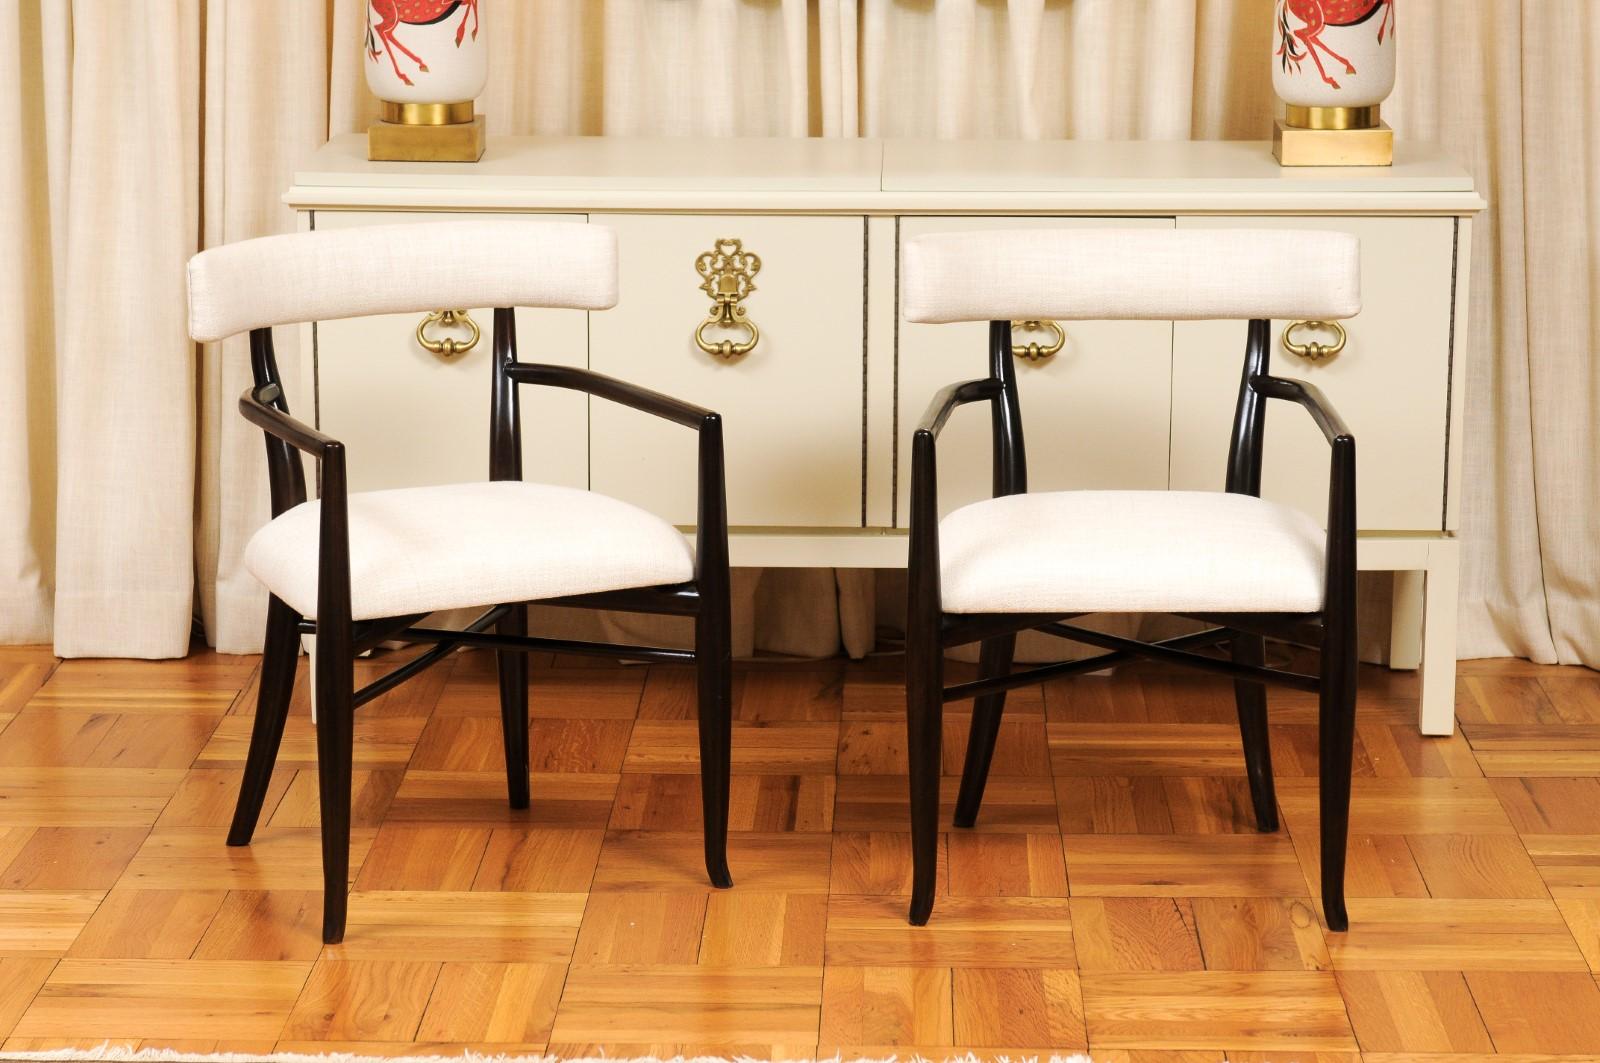 This magnificent set of dining chairs is shipped as professionally photographed and described in the listing narrative: Meticulously professionally restored, newly upholstered and completely installation ready. This large All Arm set of these rare